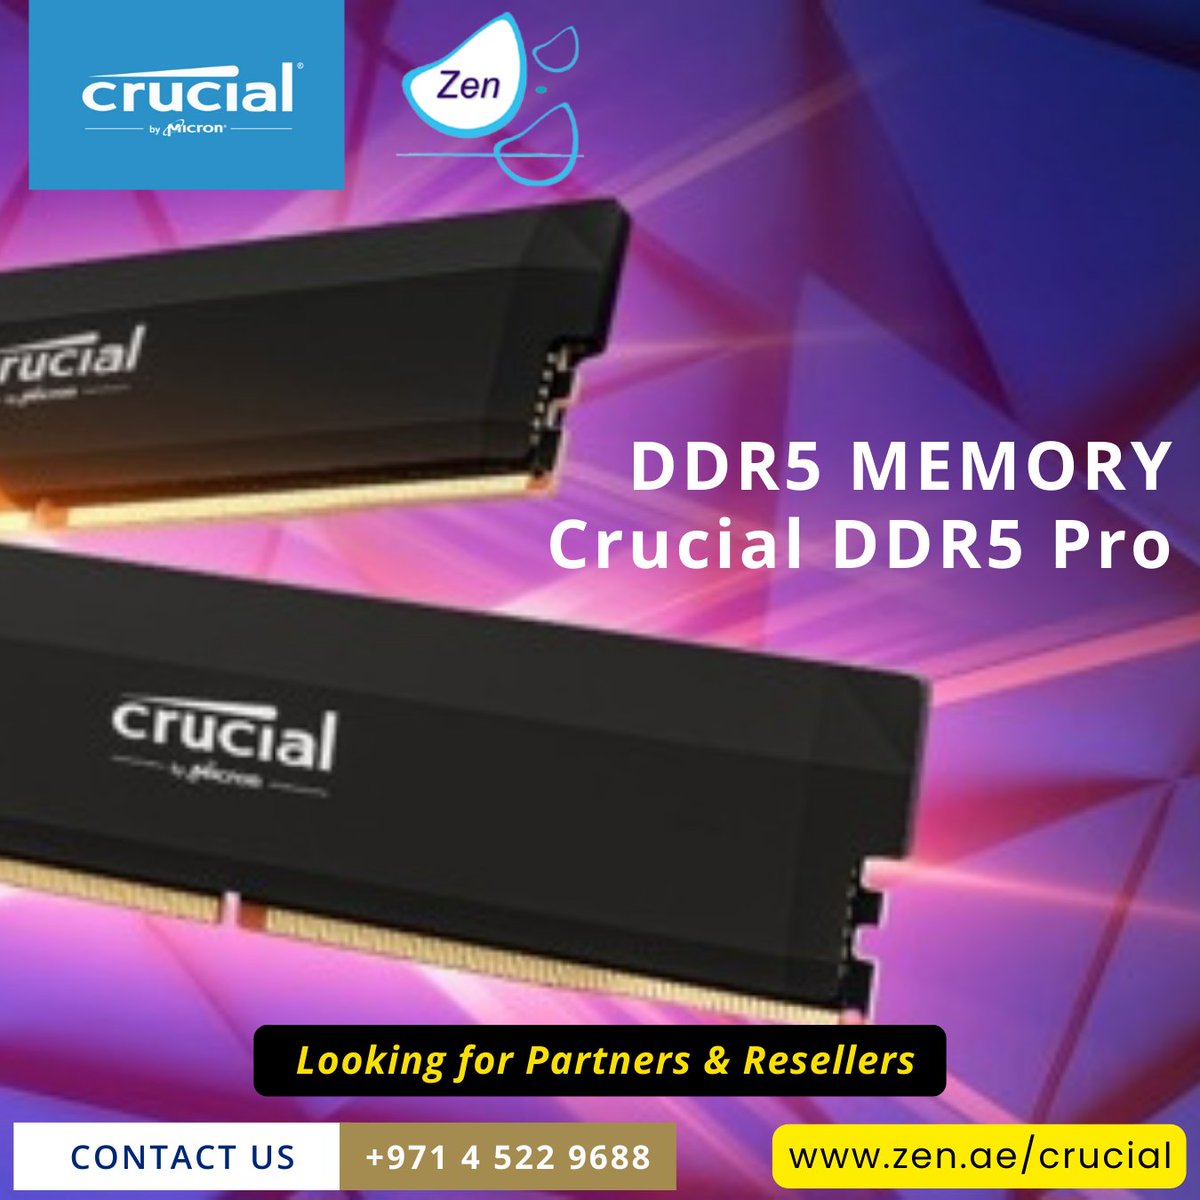 #crucial  Crucial DDR5 Memory
 
Looking for partners & resellers.

smpl.is/8nm1i

#3cx #zenitdxb #zenit #businesscommunication #dubaistartup #3cxhosting #simhosting #saudistartups